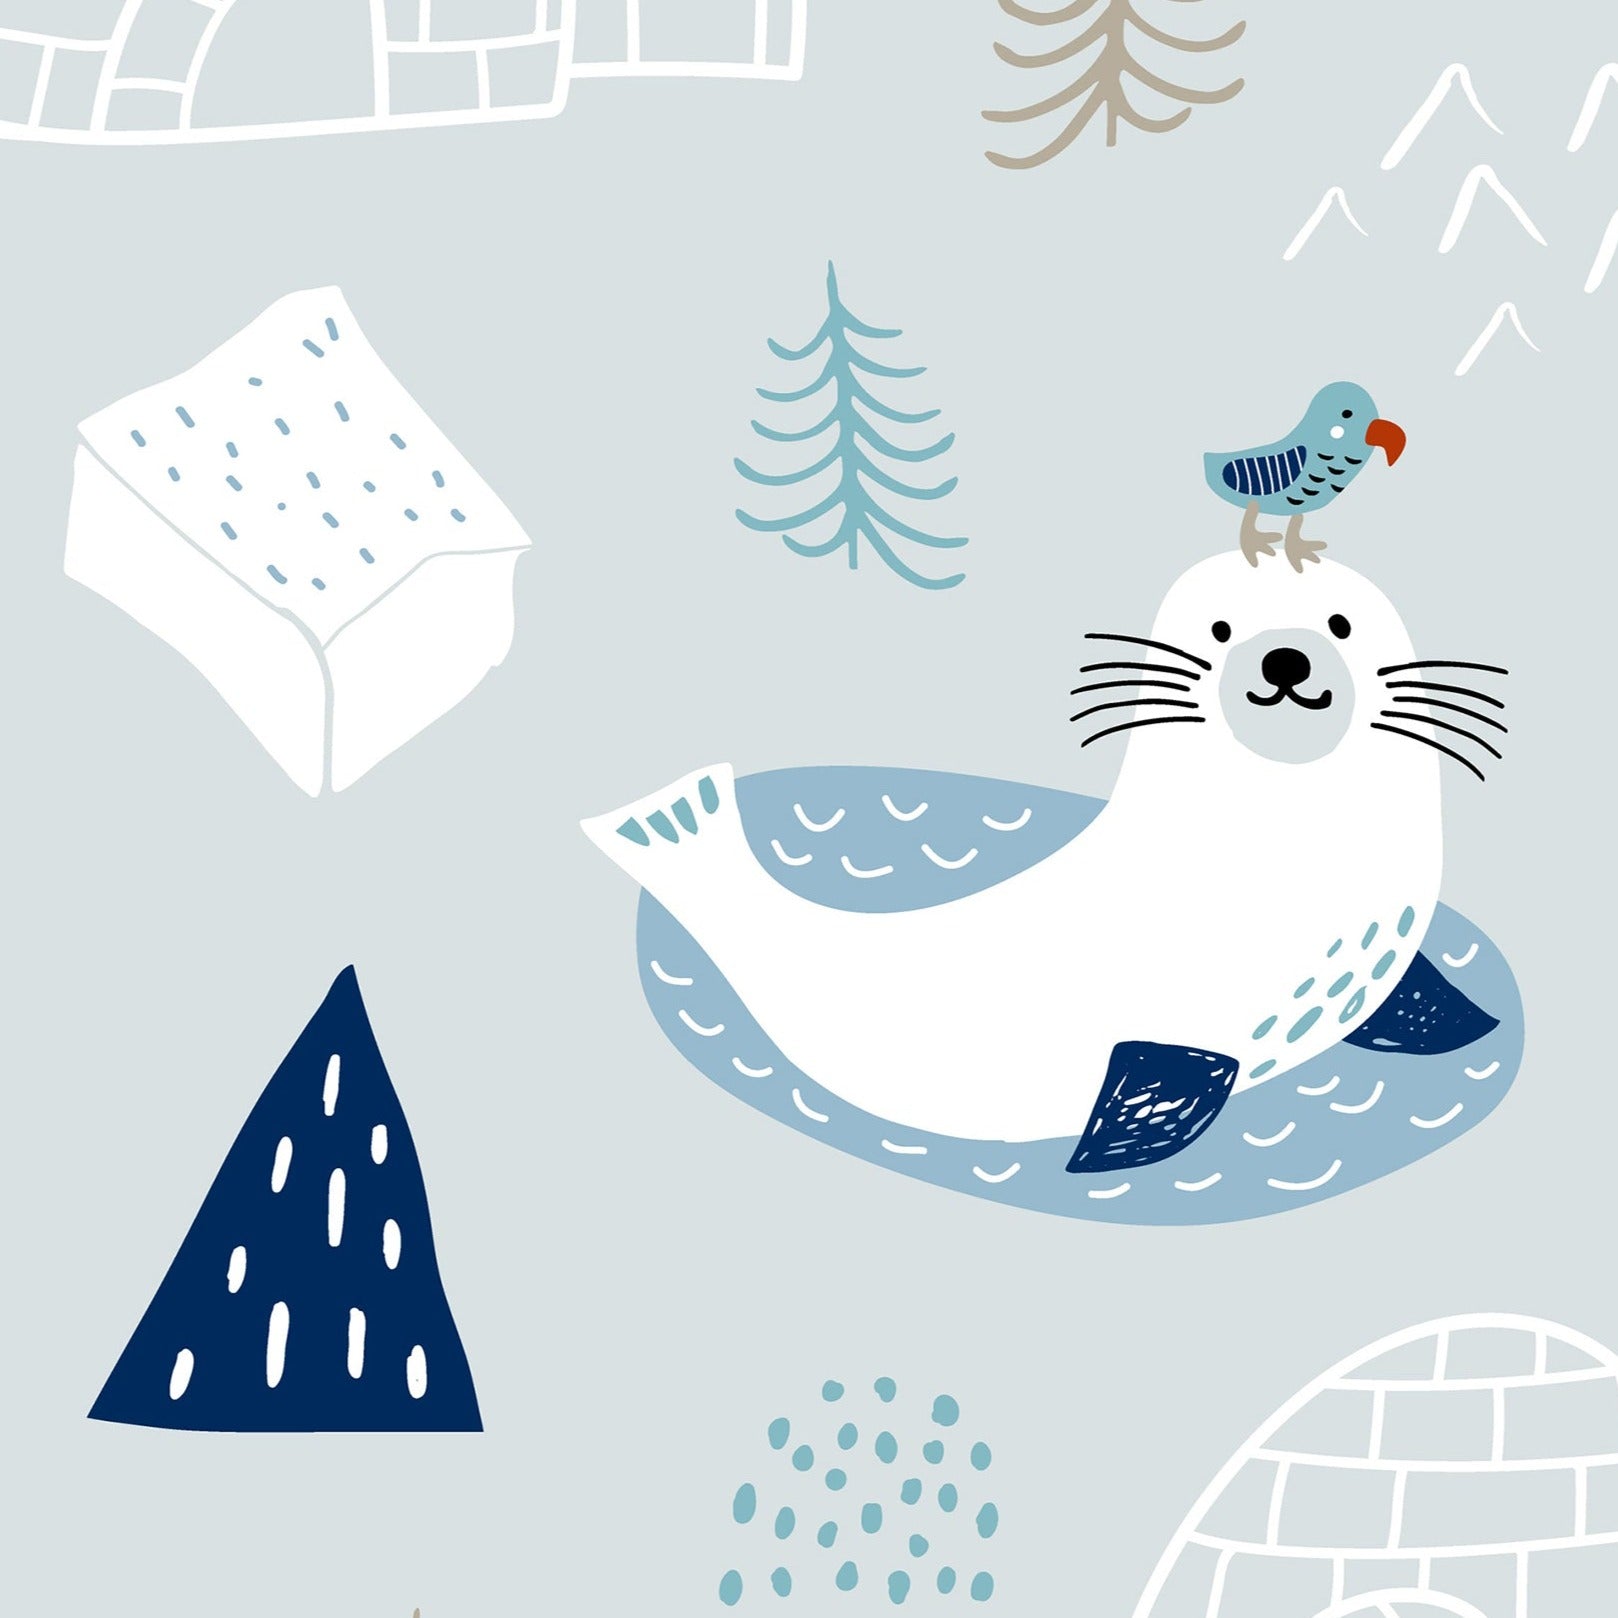 A playful and serene wallpaper design featuring whimsical seals on ice floats, accompanied by stylized trees, igloos, and mountains in a cool color palette of blues and grays. Each seal is charmingly illustrated with a joyful expression, enhancing the light-hearted, Arctic-inspired theme.